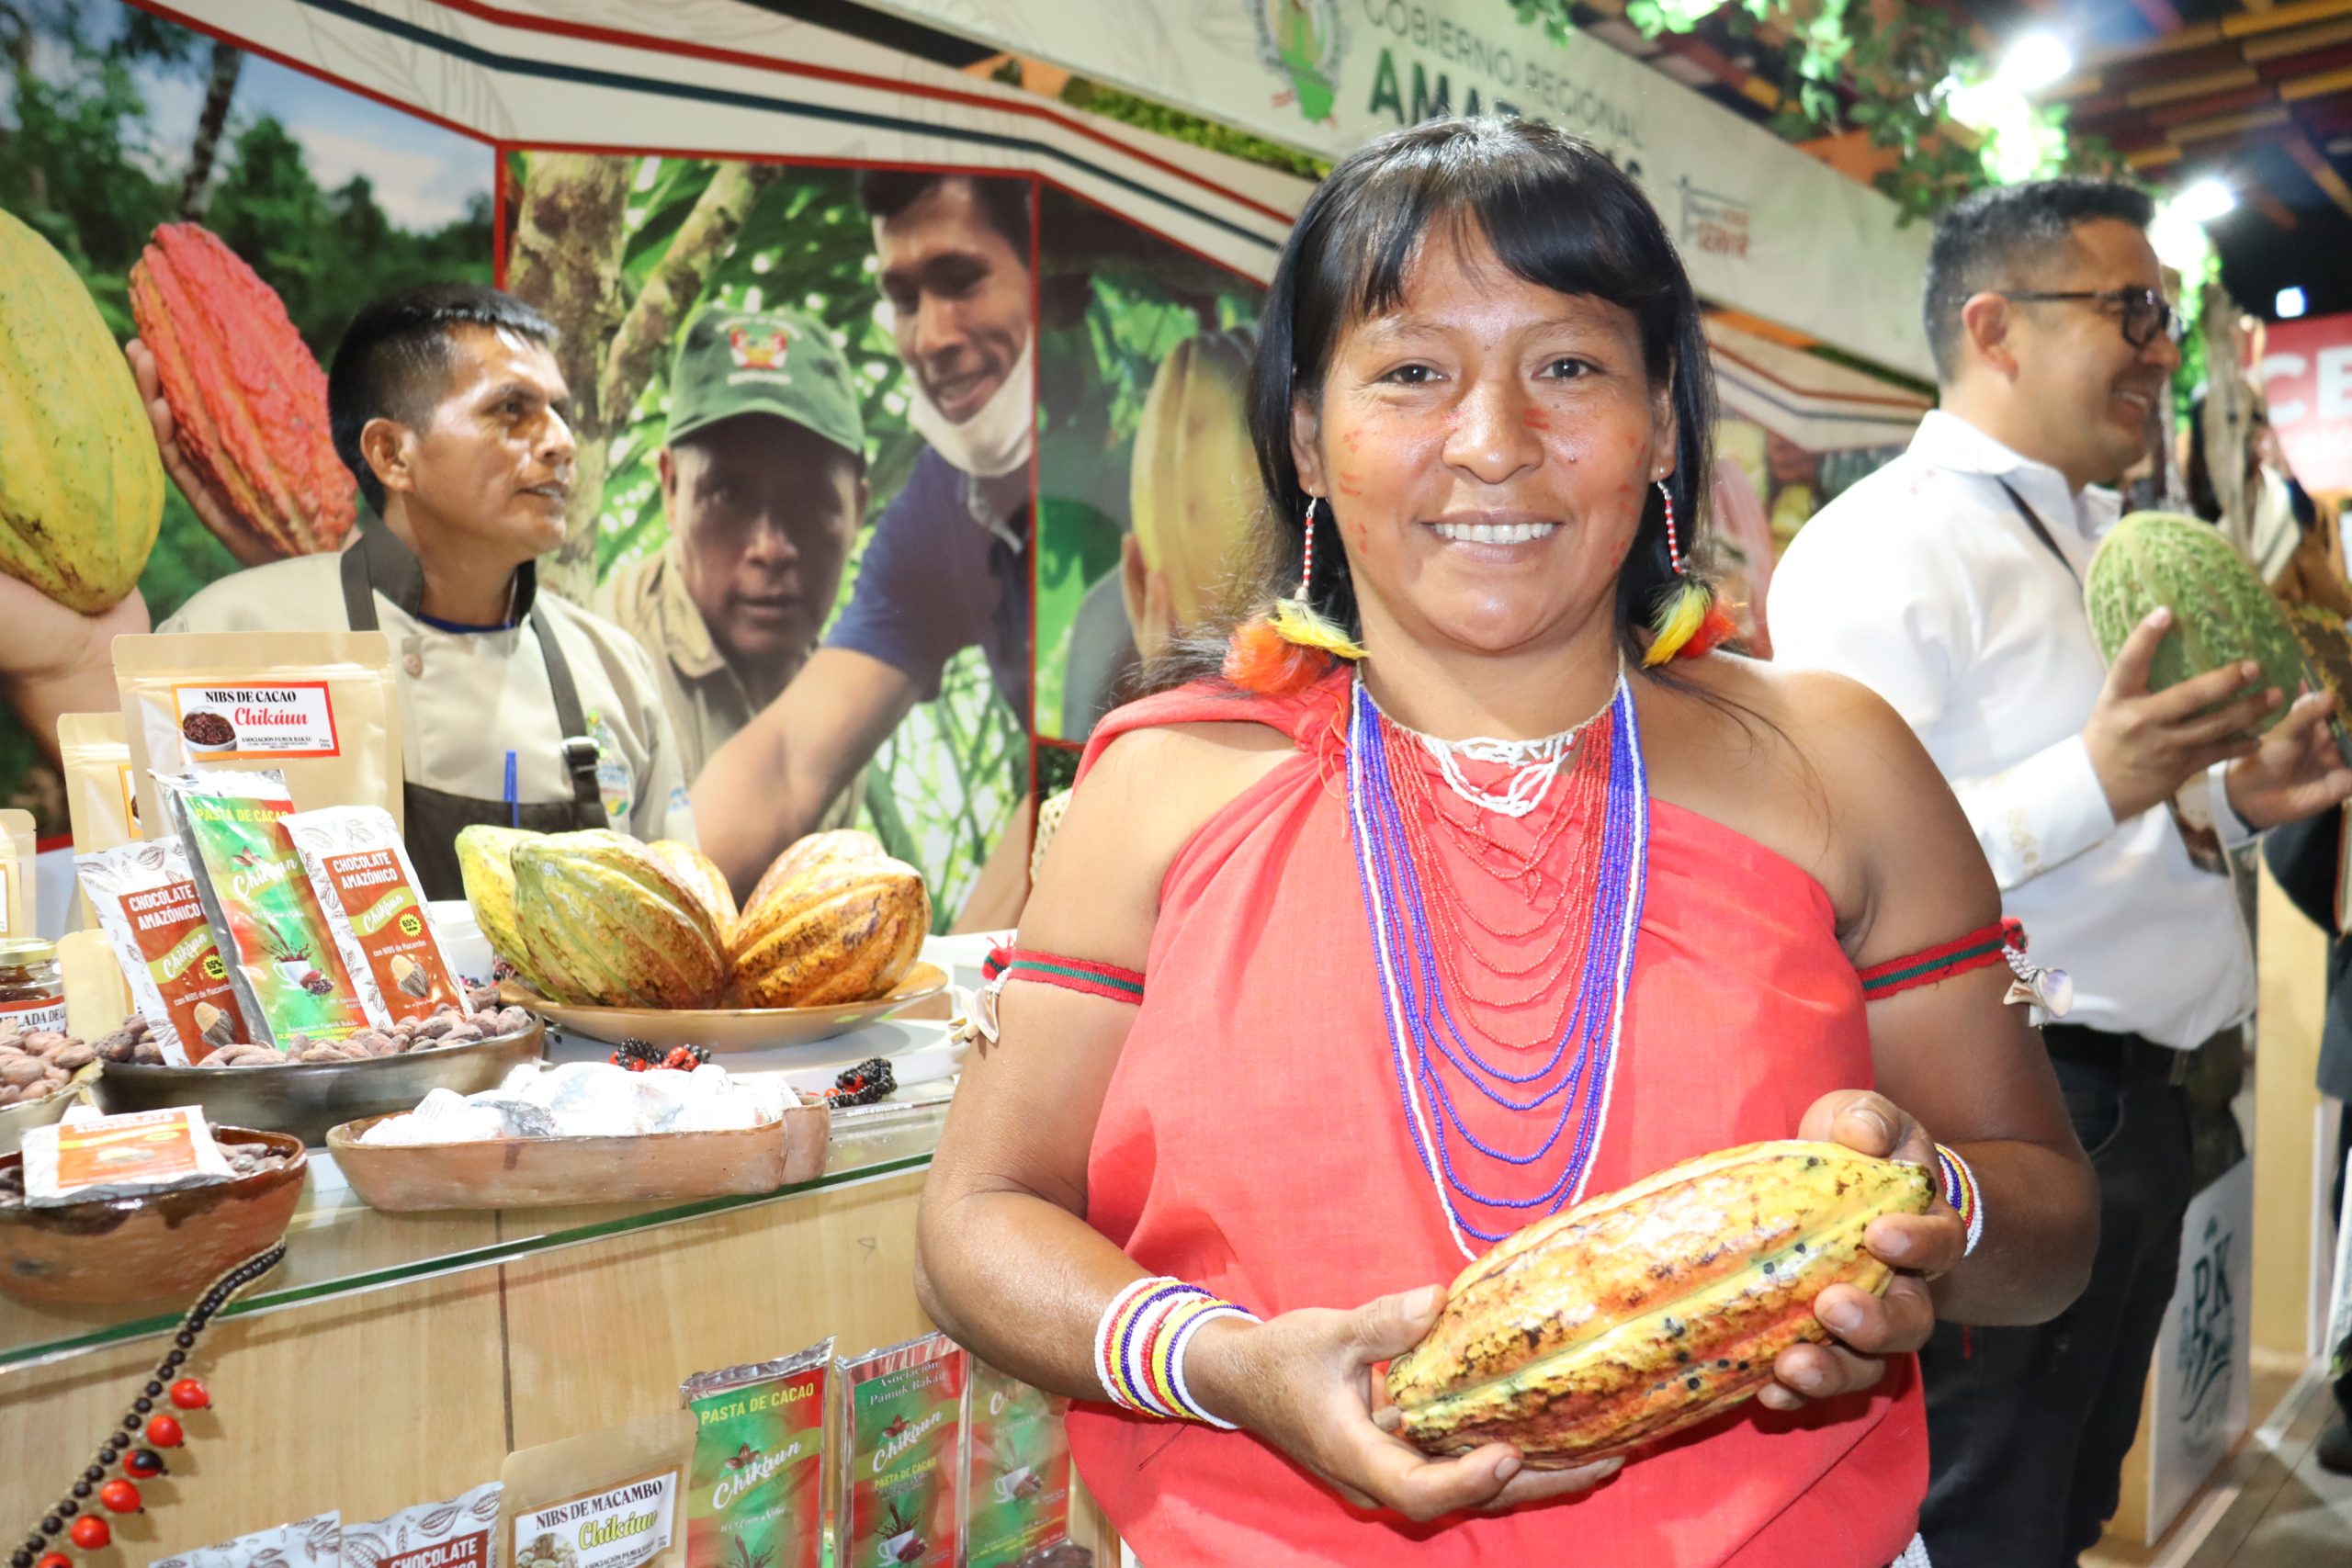 Cemilia Pijushkun part of the post-harvest team smiles at the camera, she is wearing traditional Awajún dress including a red dress, with traditional jewellery. She holds a cacao pod in her hands. Behind her we can see the cacao fair taking place, the Chikáun stall is directly behind her where we can see more cacao pods and the cacao products for sale. 